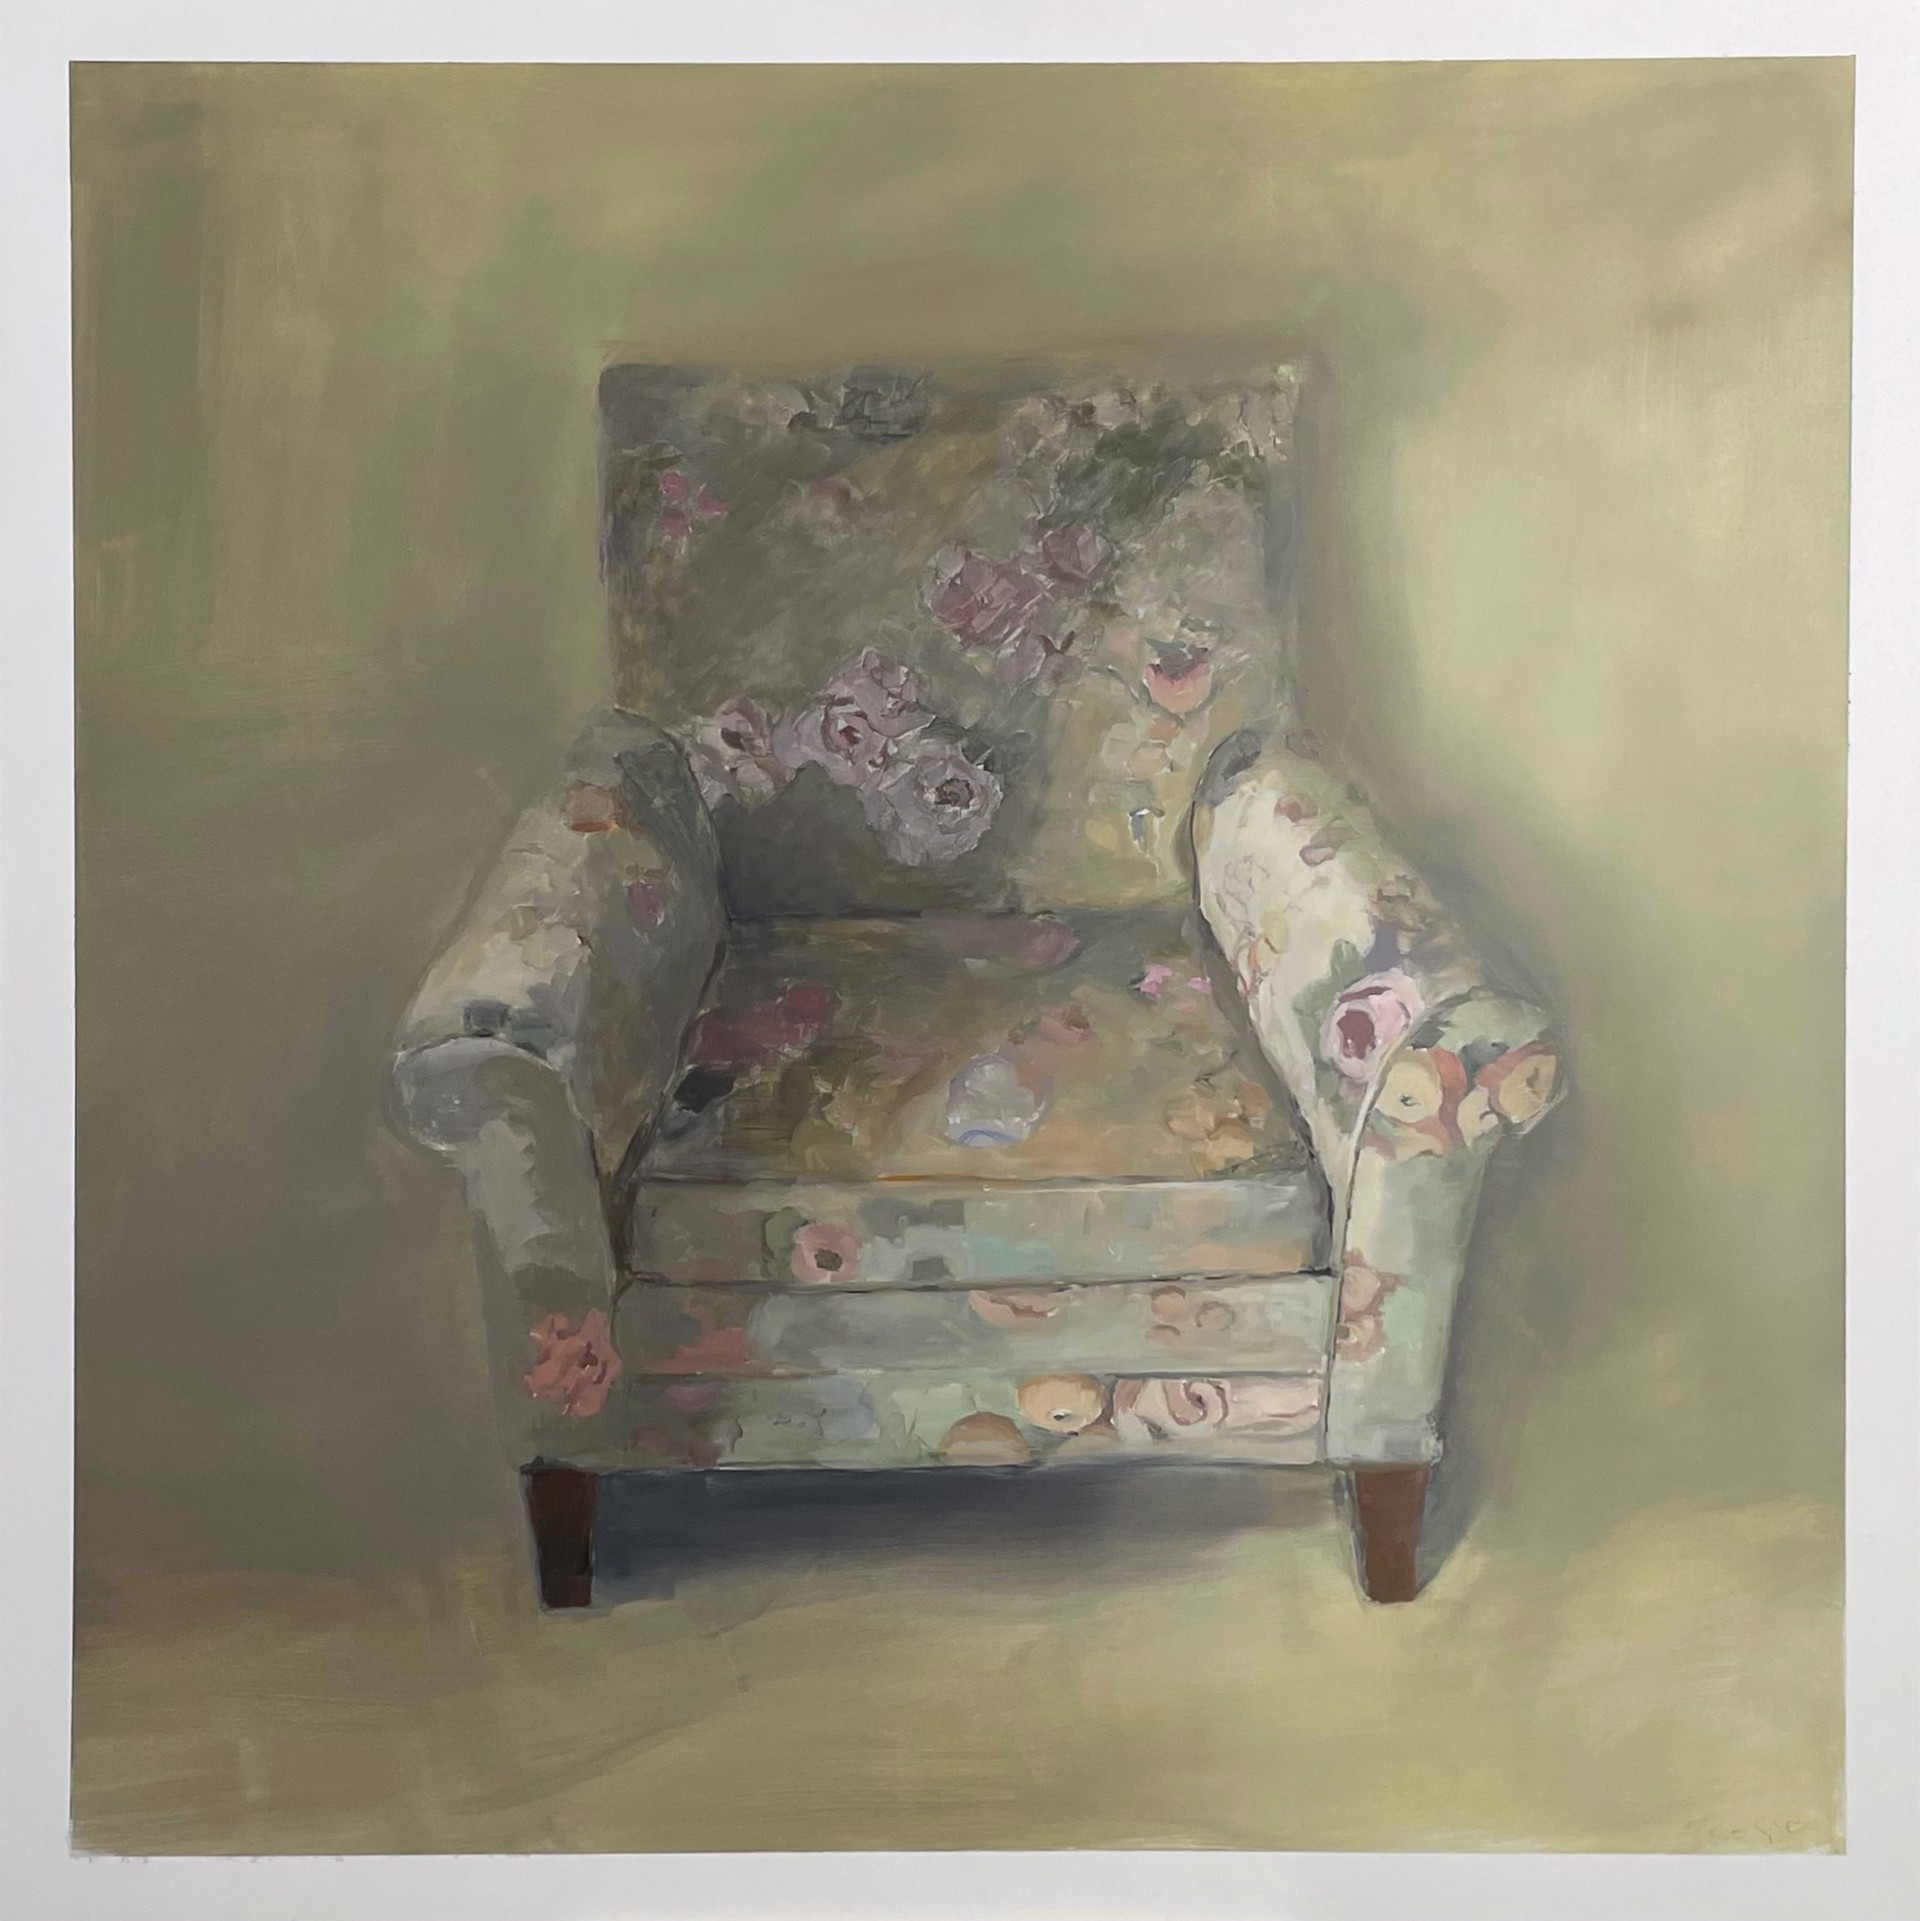 A Chair Sitting Empty by Stephen Coyle